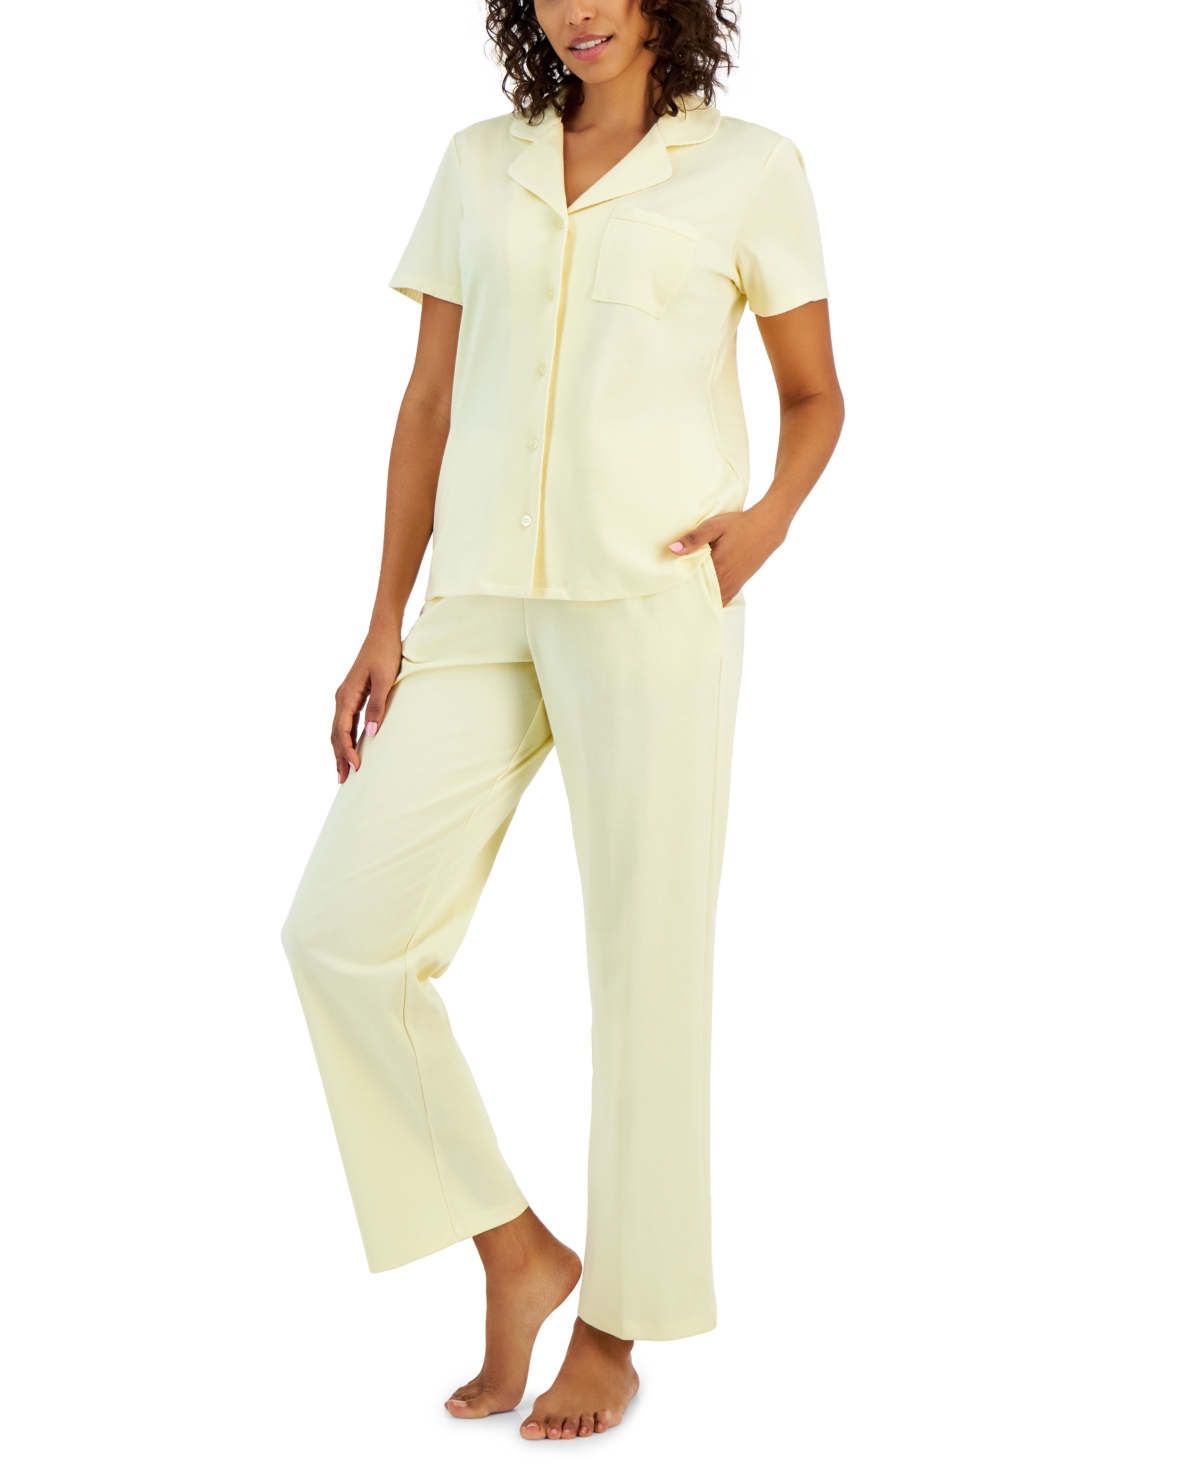 Charter Club Women's 2-Pc. Notched-Collar Pajamas Set, Created for Macy's -  Summer Moon